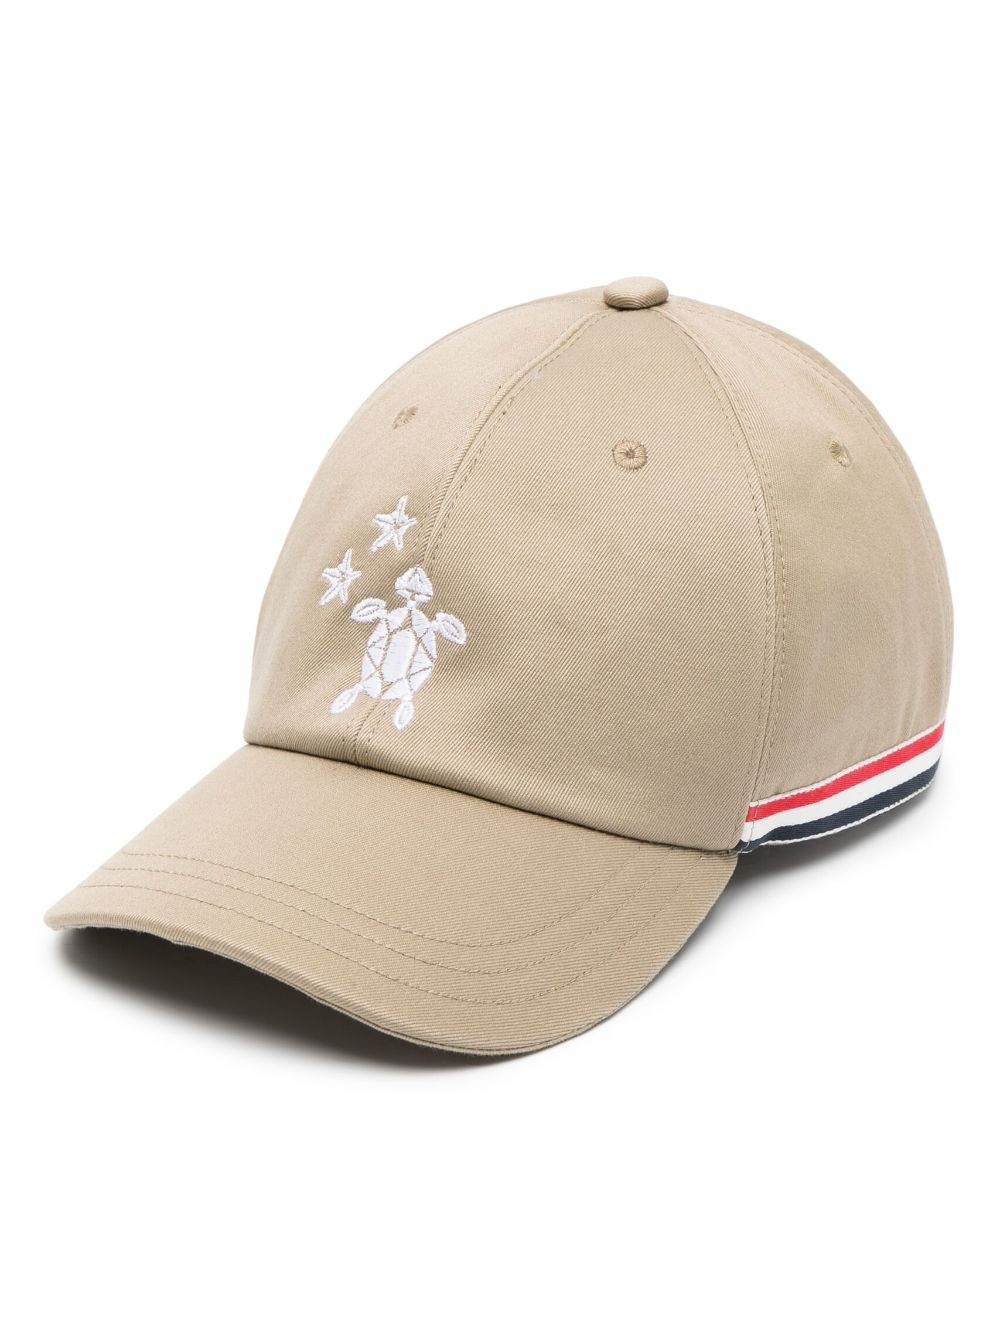 embroidered-turtle cotton cap - 1